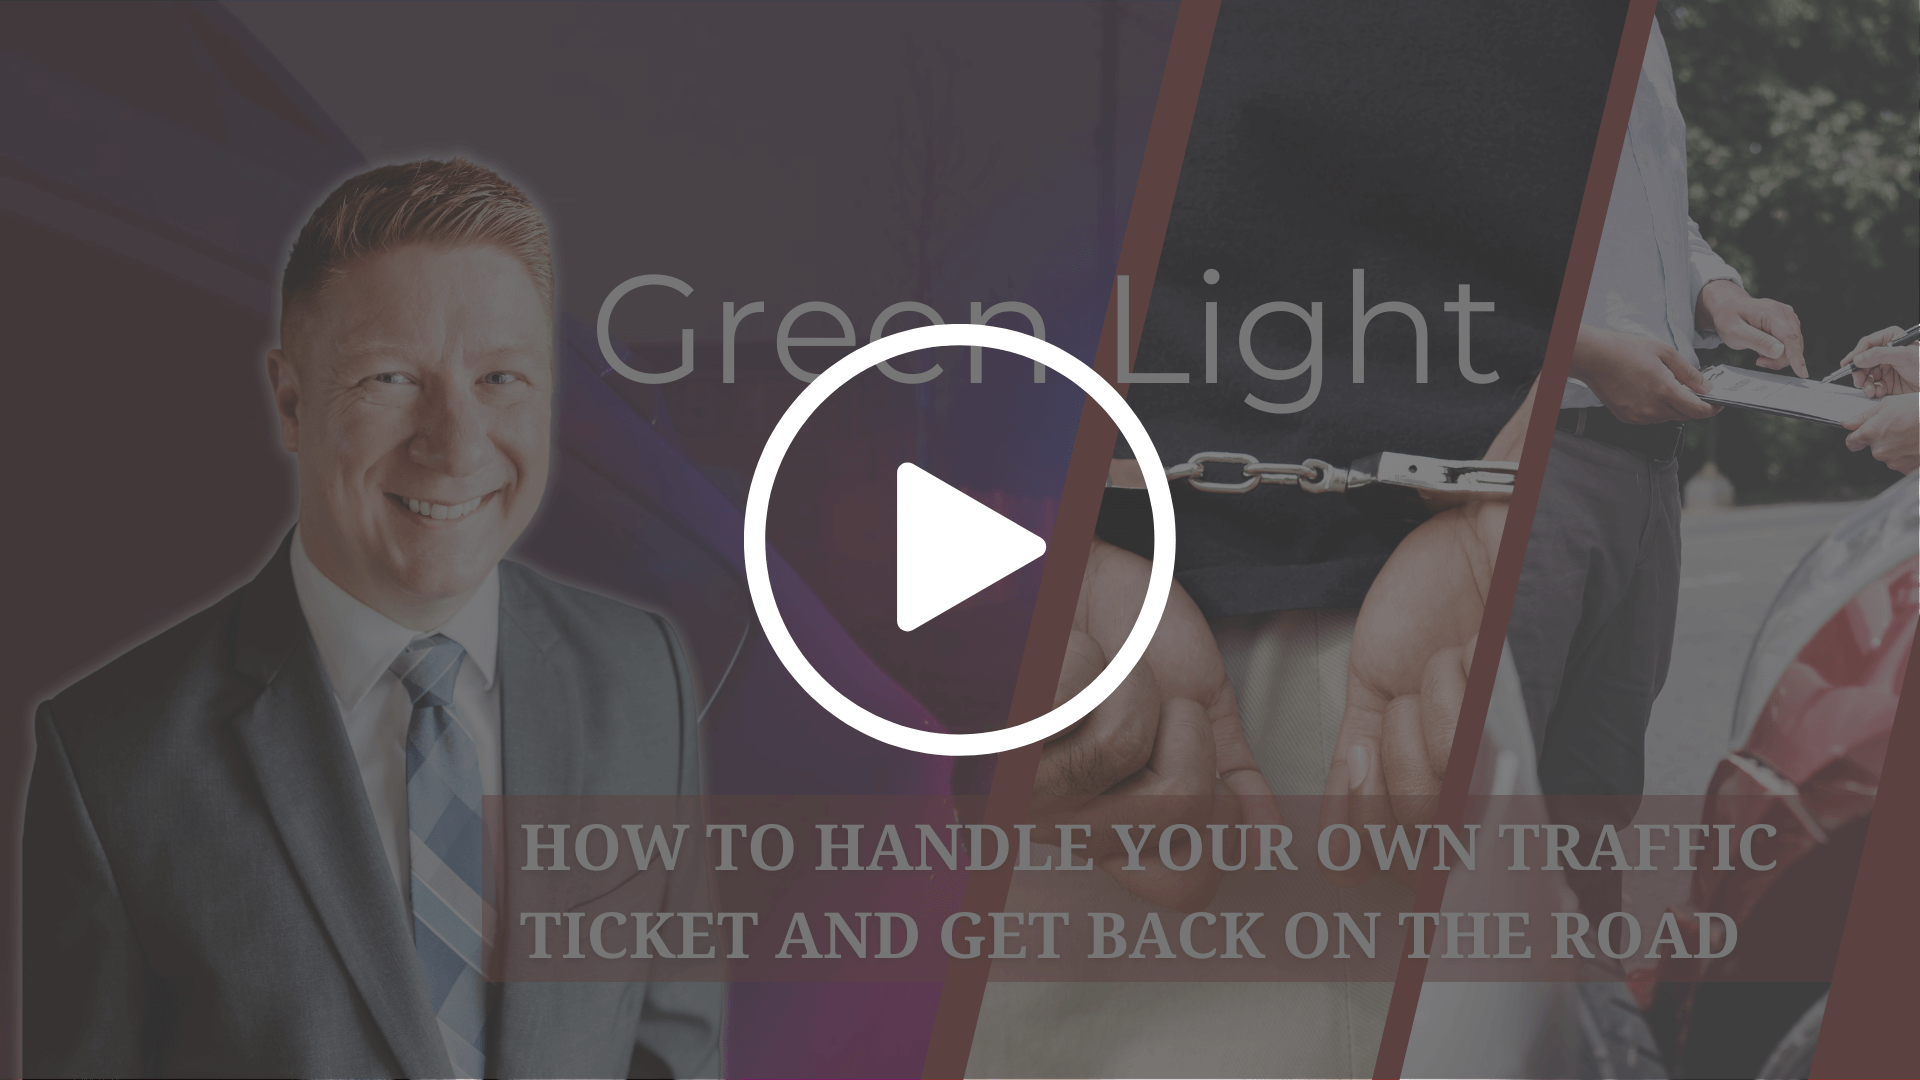 Green Light: How to Handle Your Traffic Ticket and Get Back on the Road